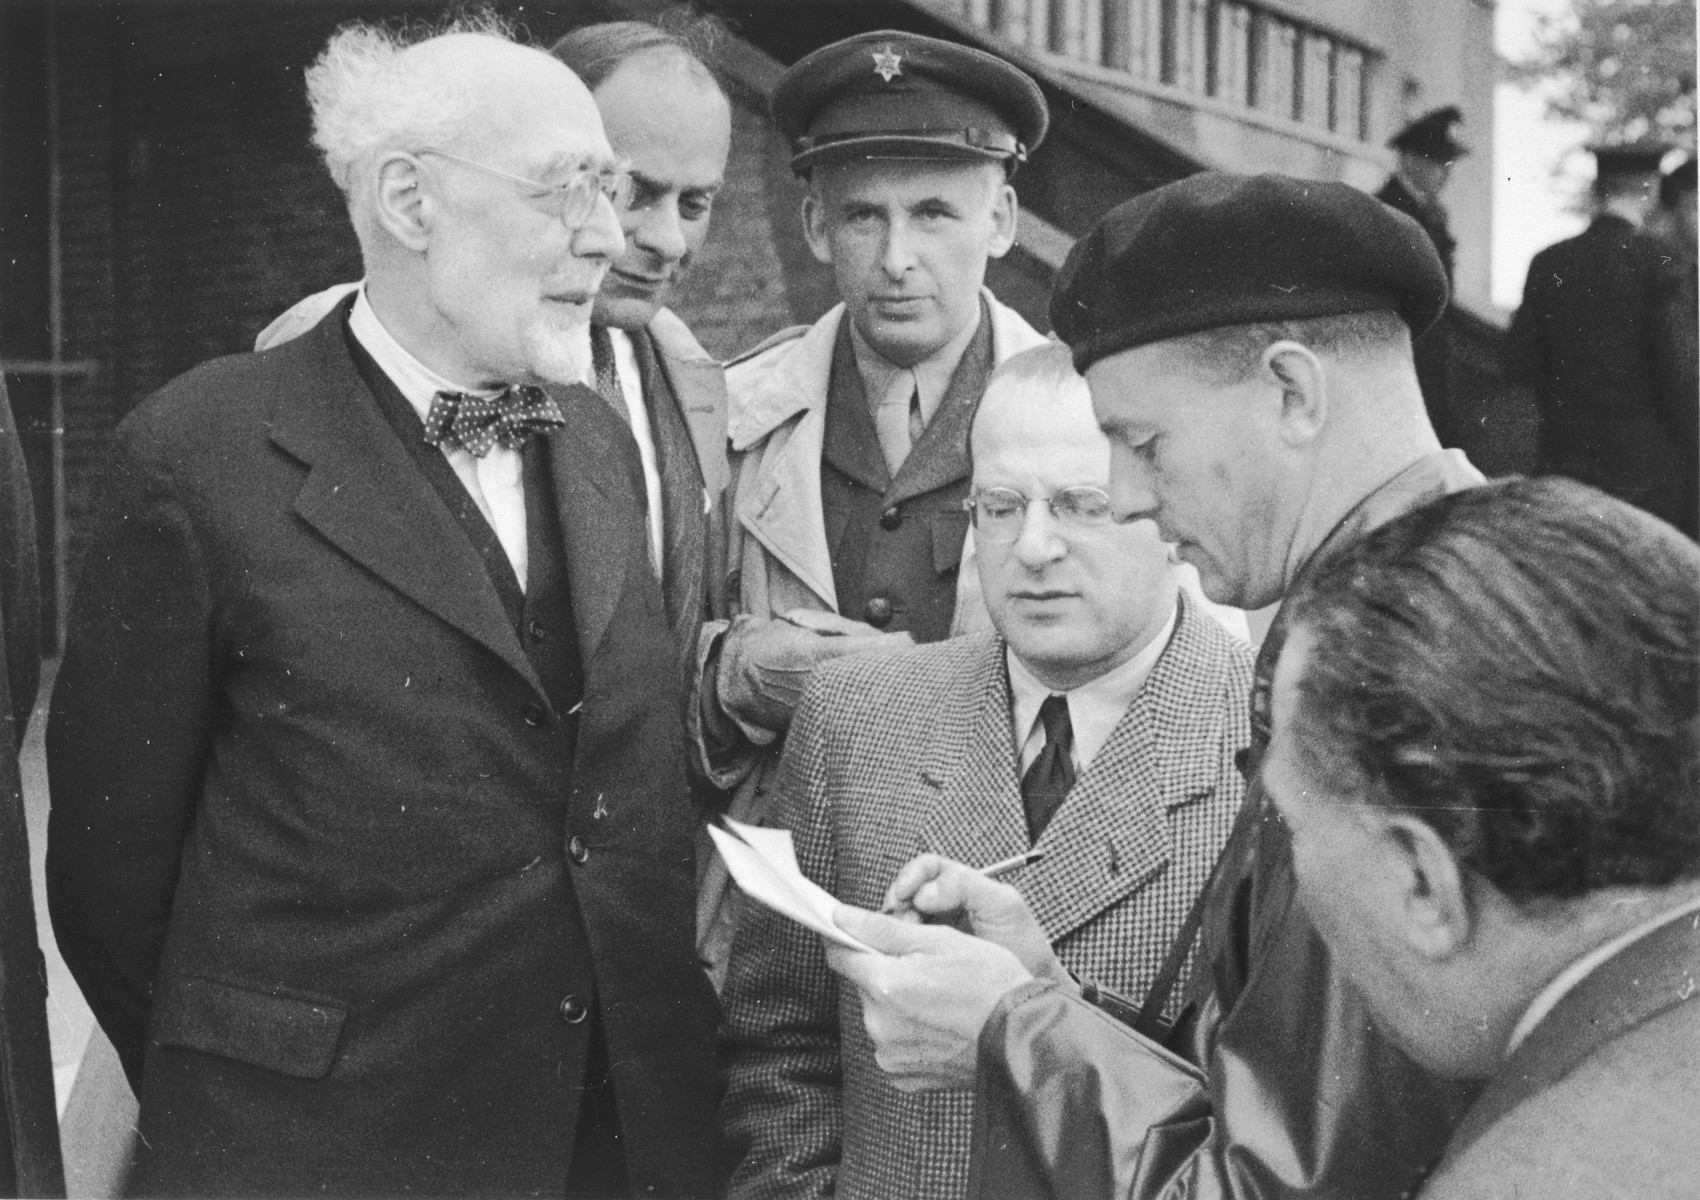 Rabbi Leo Baeck is interviewed by a British soldier upon his arrival in Hamburg at the start of a three week visit to Germany.  

 Also pictured are Norbert Wollheim (wearing glasses in the center) and Heinz Salomon, Leader of Jewish Welfare after the war (behind Leo Baeck).

Baeck was greeted at the airport by Norbert Wollheim, Chairman of the Central Committee of Jews in the British Zone.  Baeck's trip included participation in an evangelical congress in Darmstadt on October 12, as well as numerous appearances before local Jewish communities.